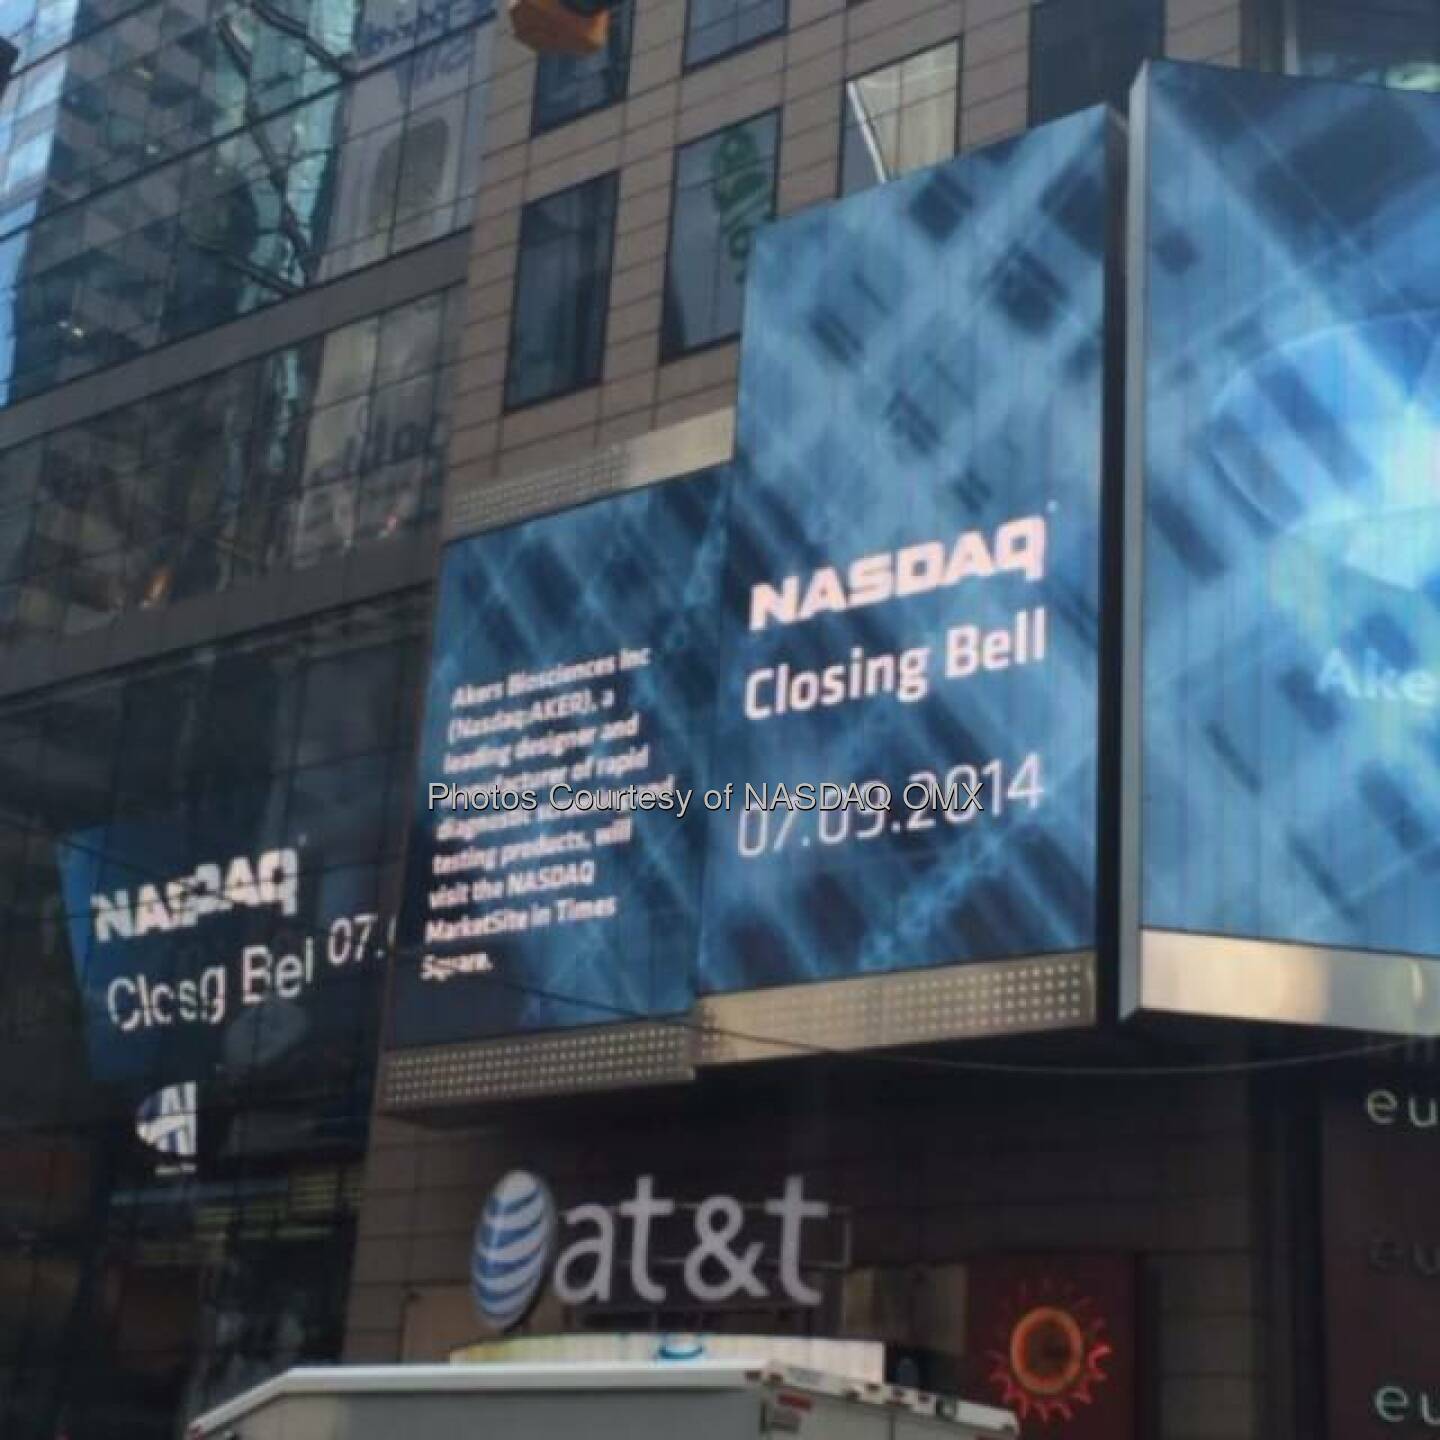 Watch Akers Biosciences Inc. takeover #TimesSquare after the Closing Bell! $AKER @AkersBio  Source: http://facebook.com/NASDAQ